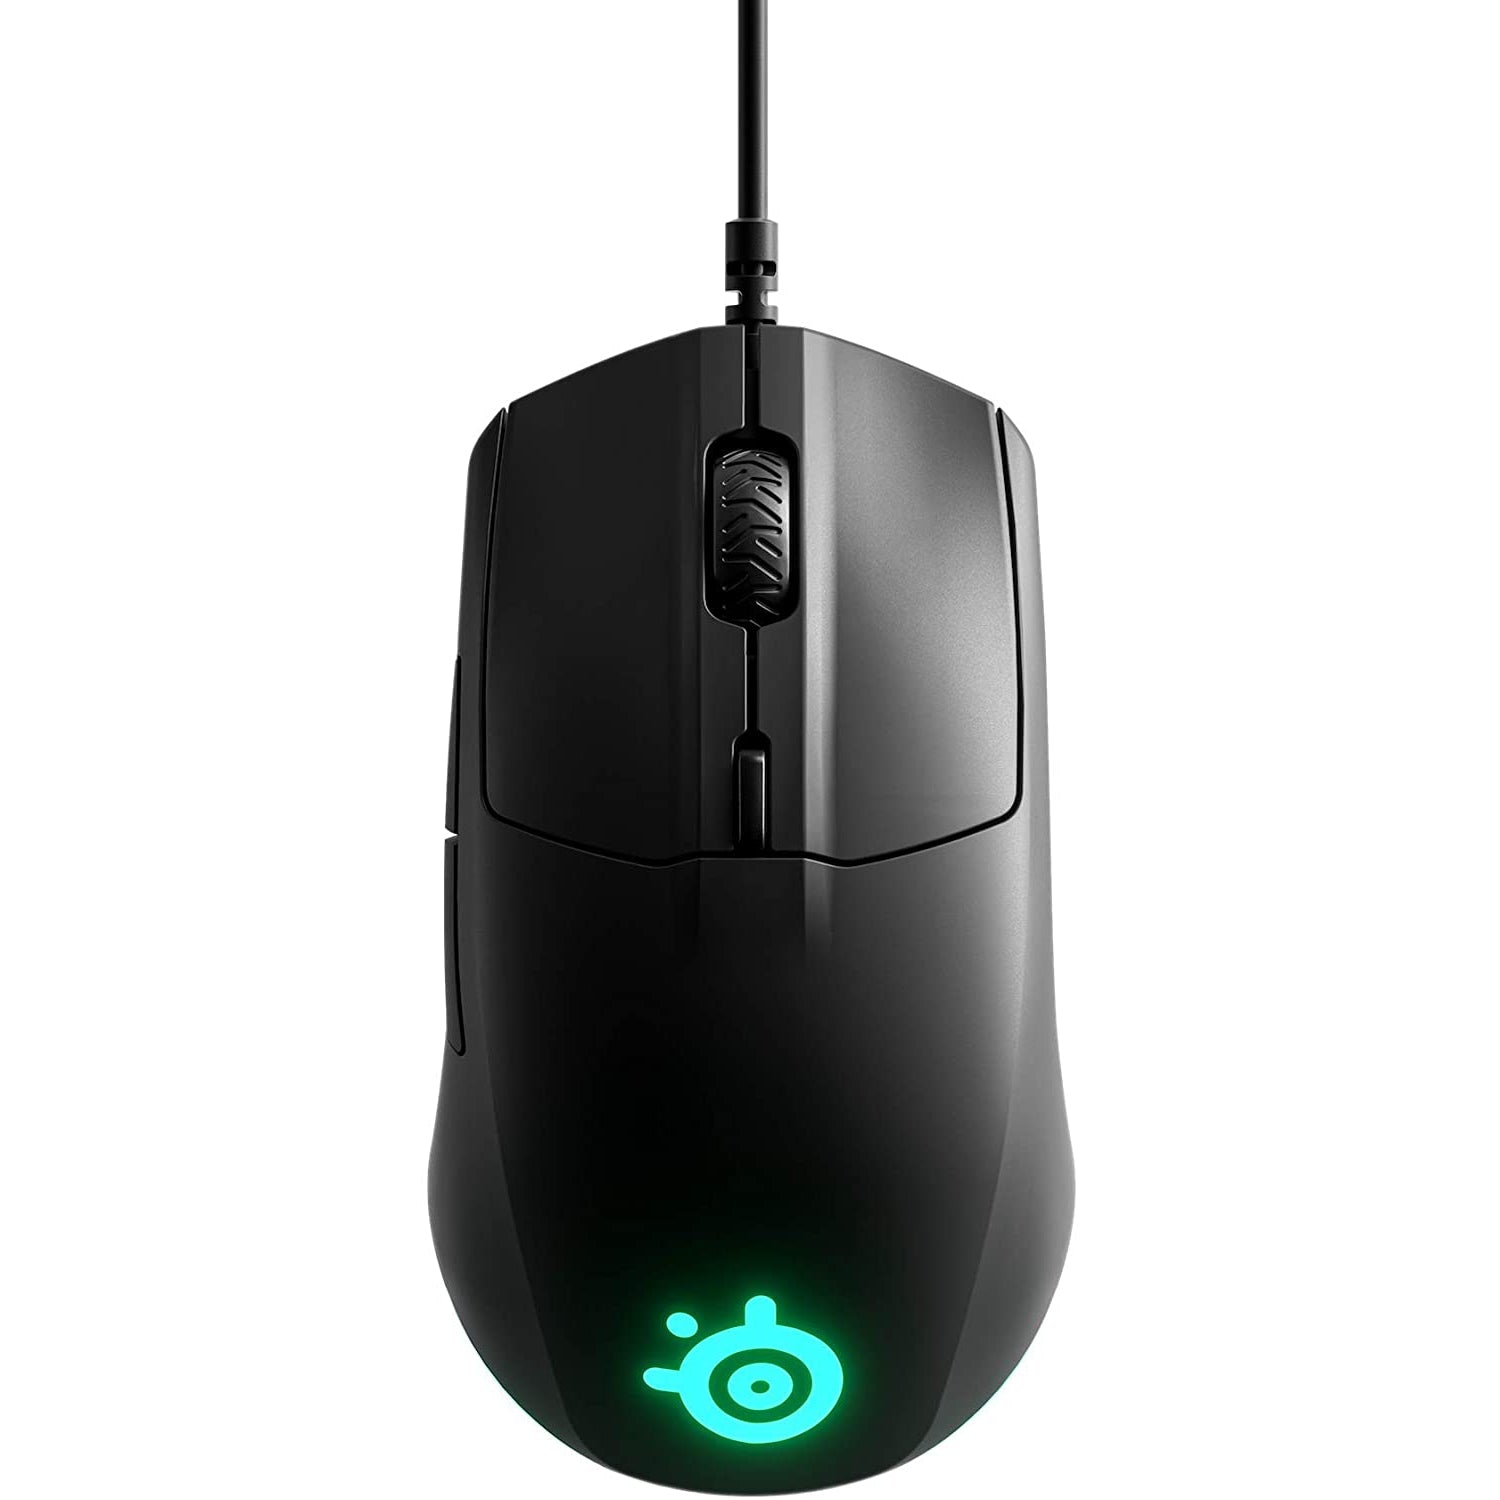 SteelSeries Rival 3 Wired Gaming Mouse - Black